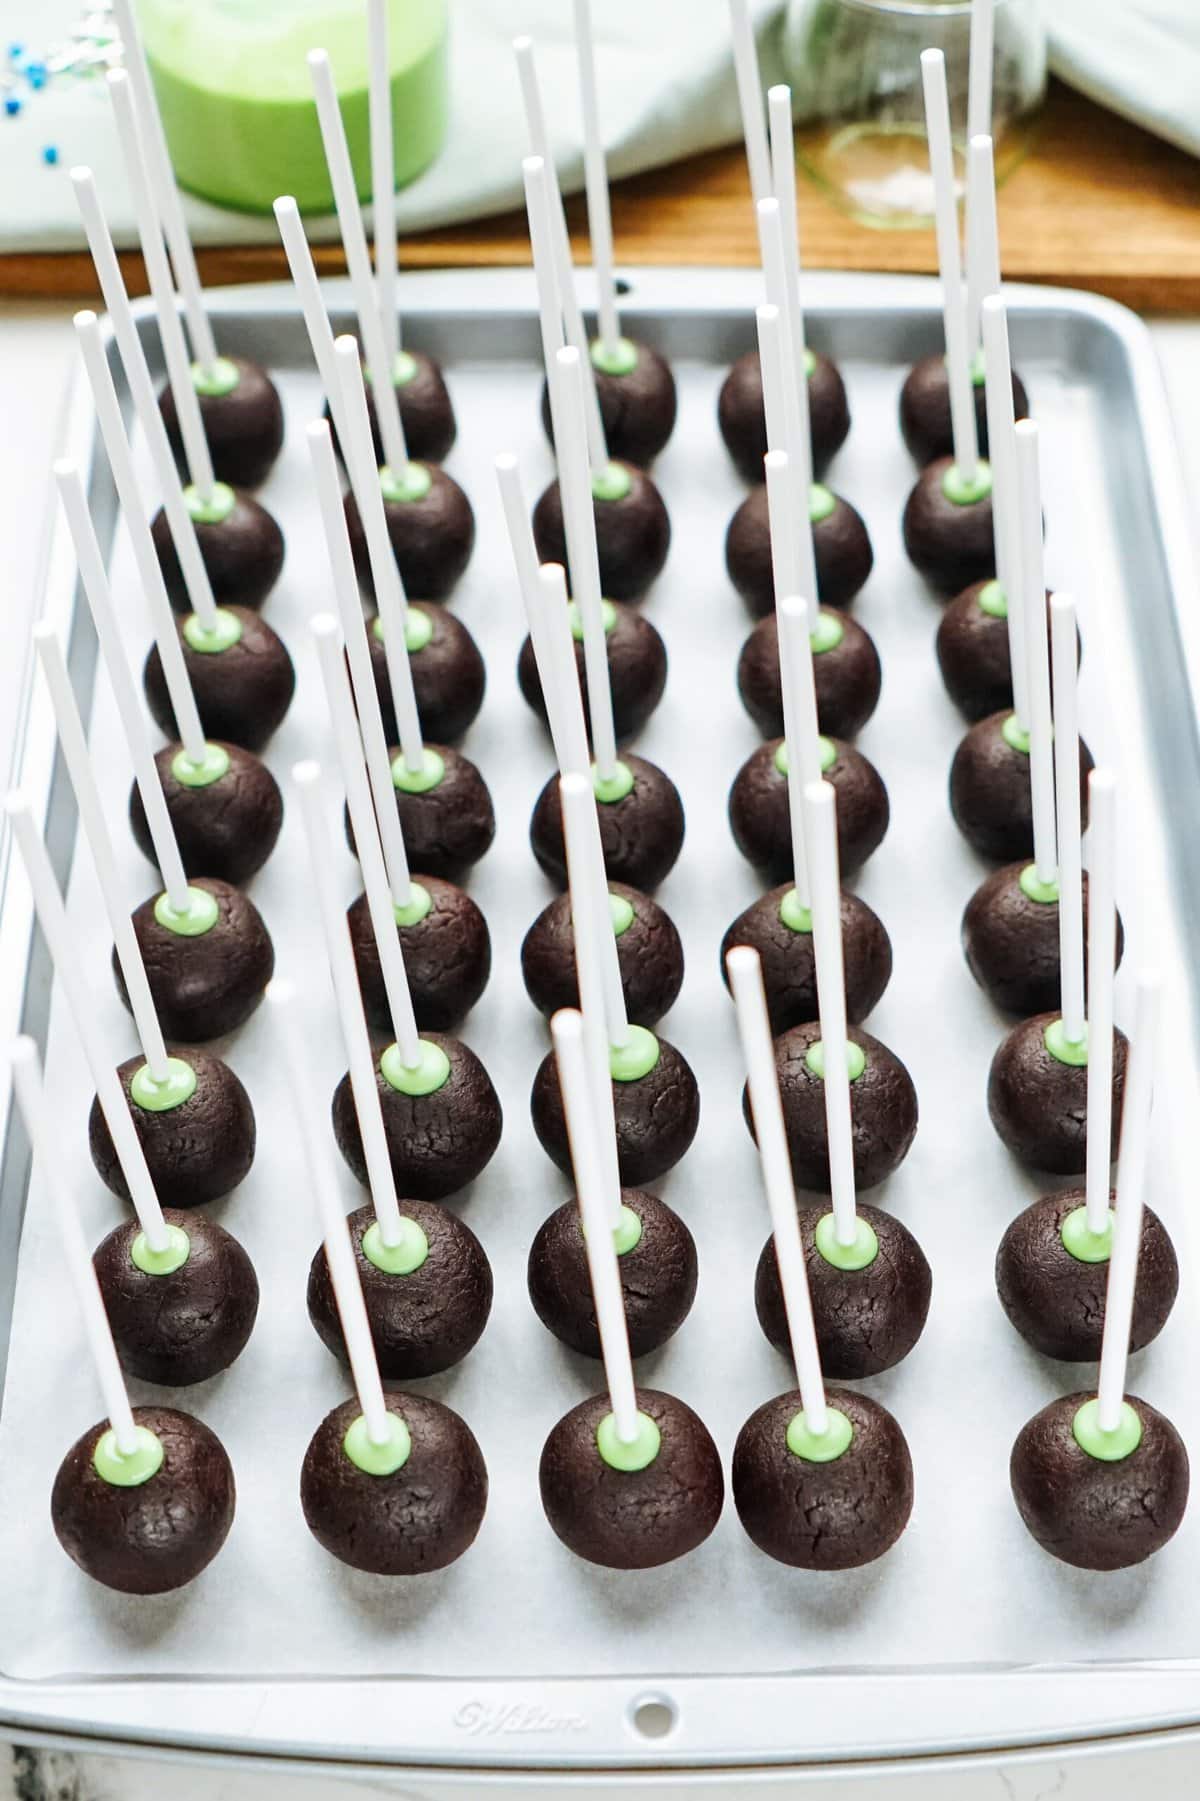 Chocolate cake pops on a tray.